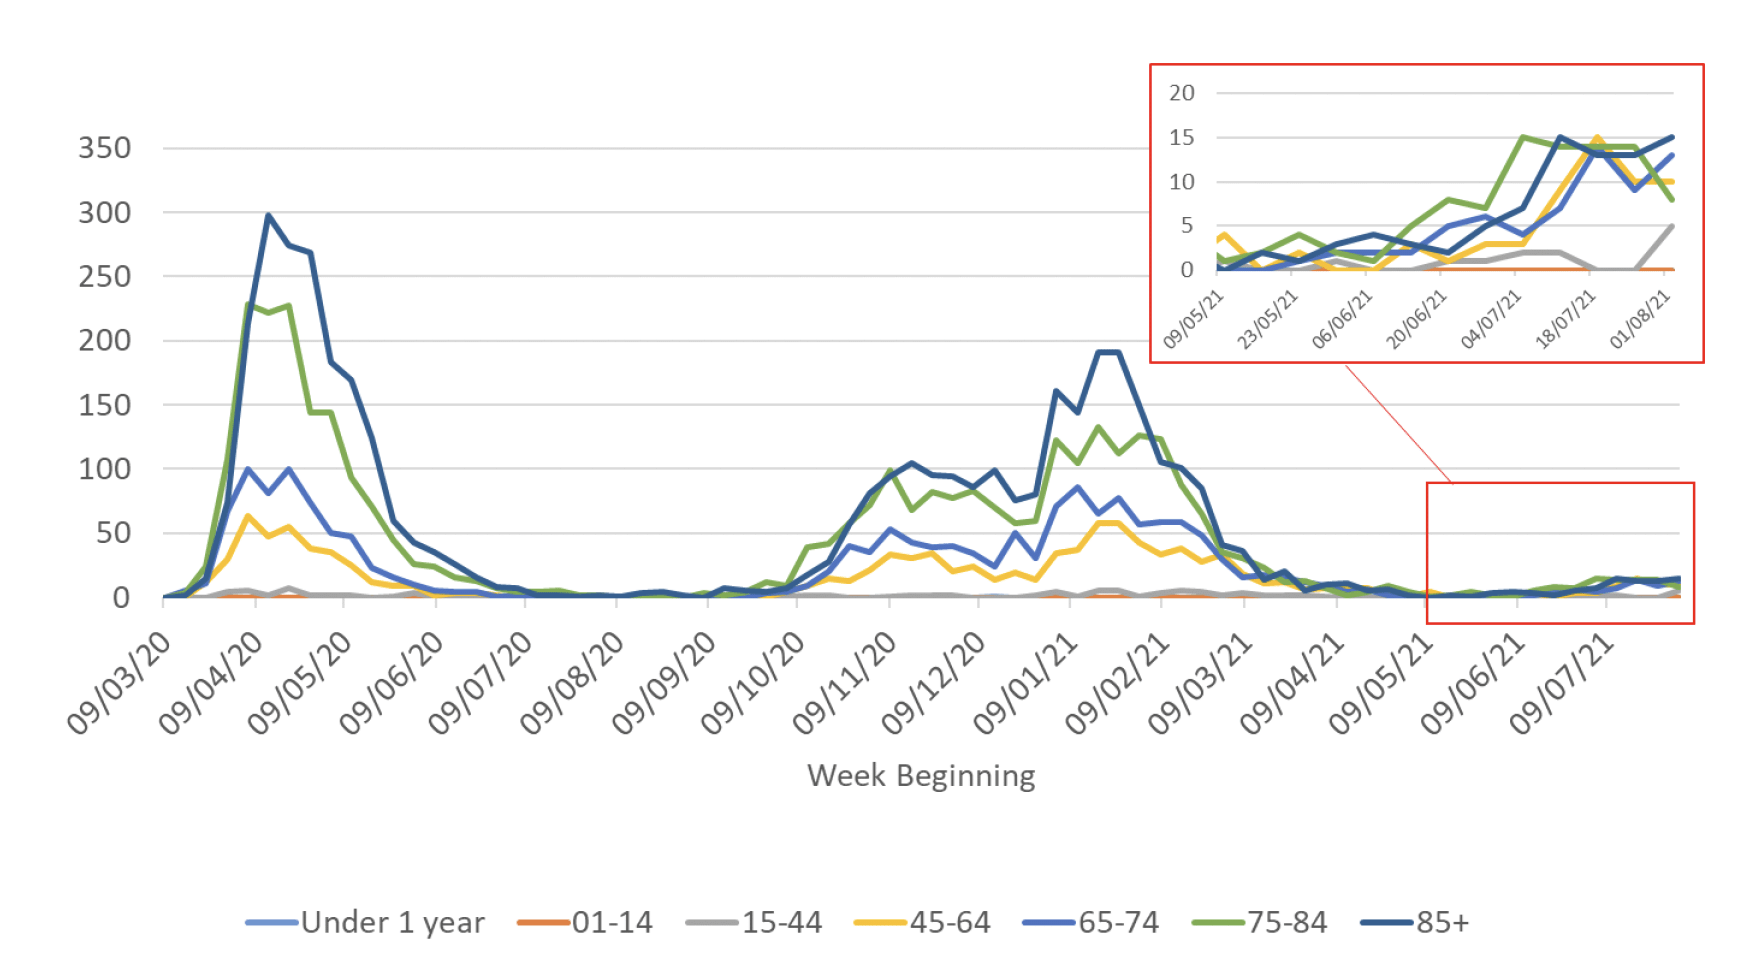 This line graph shows the weekly number of deaths for seven different age groups over time, from March 2020. In April 2020 the number of deaths in the four age groups over 45 reached a peak, with the highest number of deaths being in the over 85 age group. Deaths then declined steeply and the number of deaths was very low in all age groups from July to September. In October the number of deaths started to increase and then plateaued during November and December for the four age groups over 45. At the end of December deaths rose steeply again to another peak in January, with the highest deaths being in the over 85 age group. The number of deaths has since declined steeply with the largest decrease in the over 85 age group, followed by a sharp decline in the 75 to 84 age group. Since mid-June there has been a slight increase in deaths overall, with the greatest increase in the 45 plus age groups. However, the number of deaths in all age groups is now very low with 51 deaths registered where Covid was mentioned on the death certificate in the week to the 8th August. Deaths in the under 44 age groups have remained very low throughout the whole period.